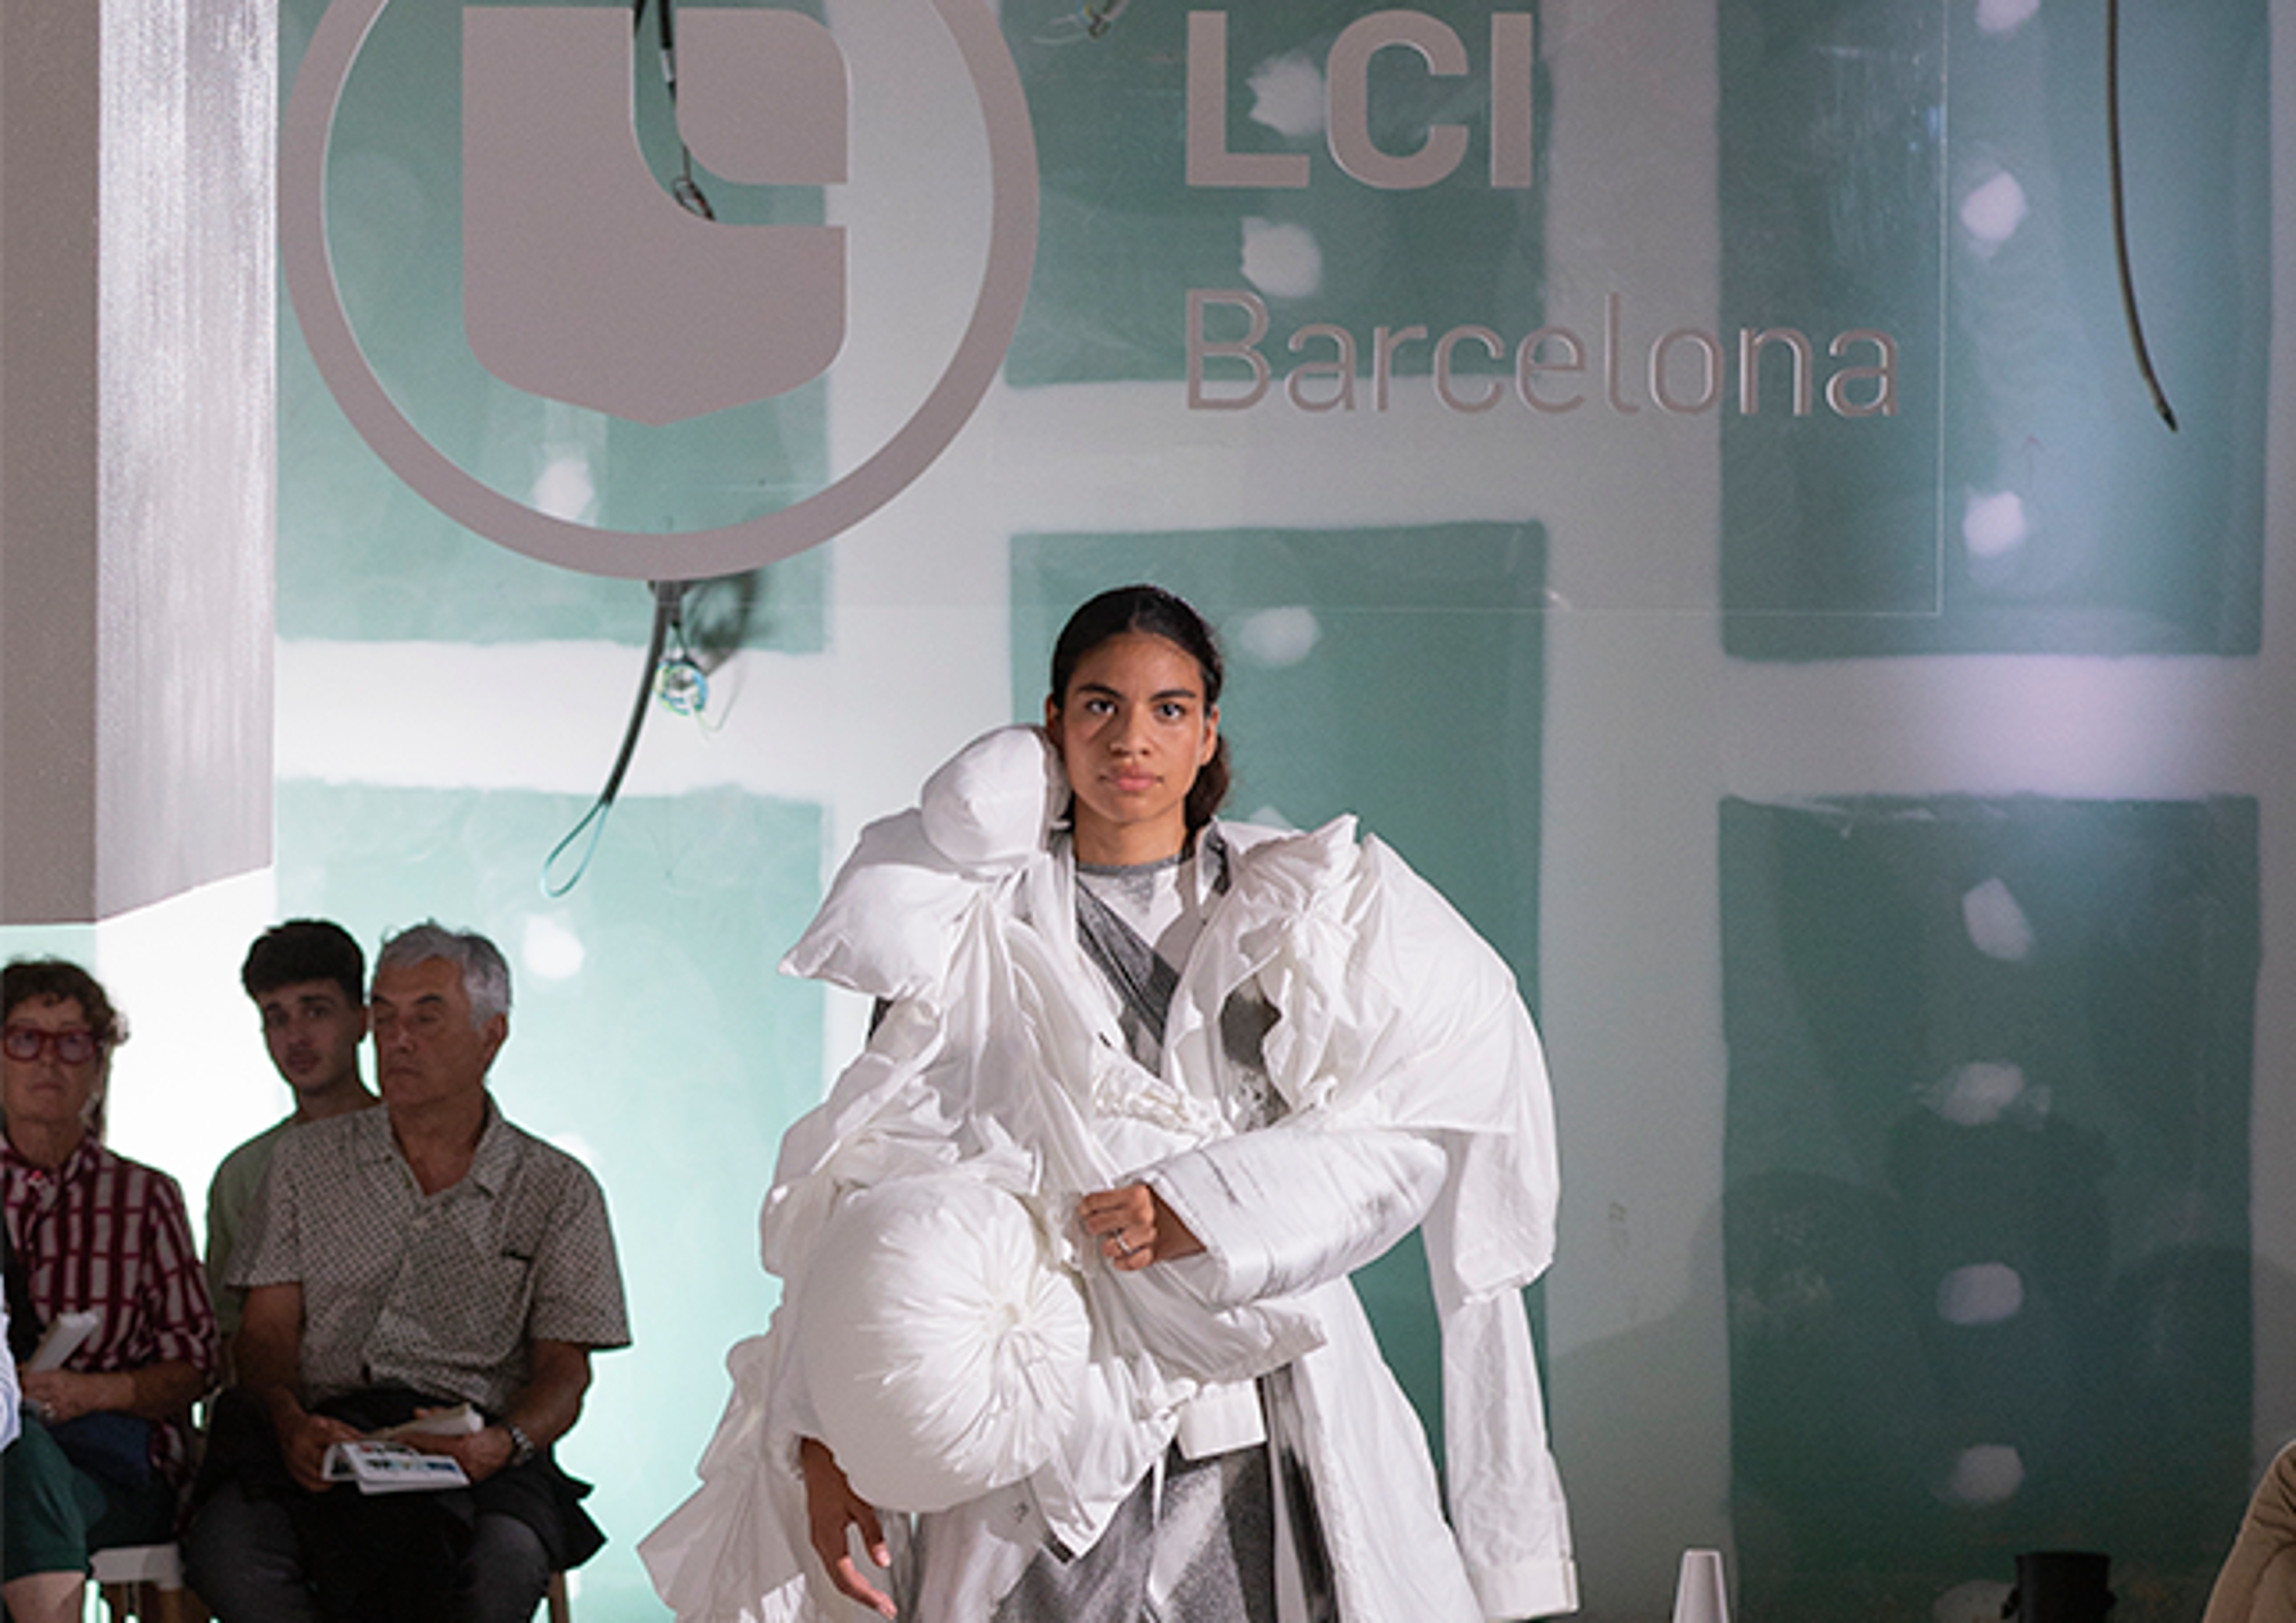 A model poses confidently in a voluminous white avant-garde outfit, embodying futuristic fashion against the backdrop of 'LCI Barcelona'